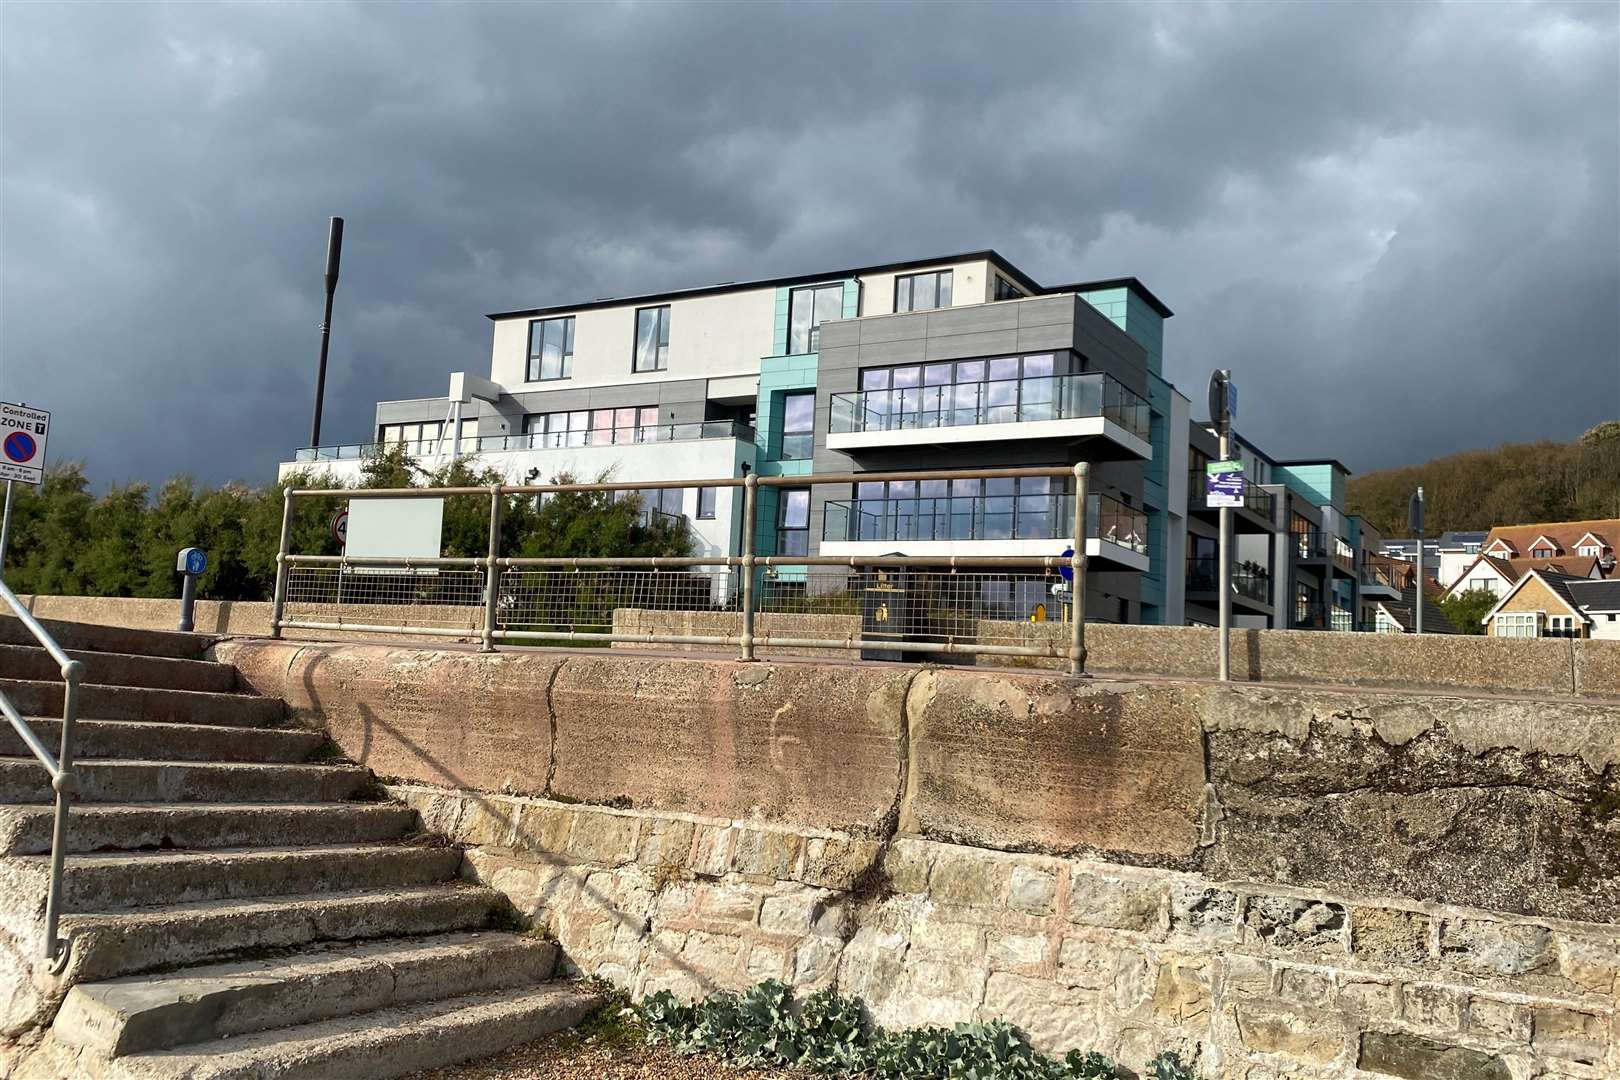 The top floor apartment is on the market for nearly £2m. All photo: C.R. Child & Partners